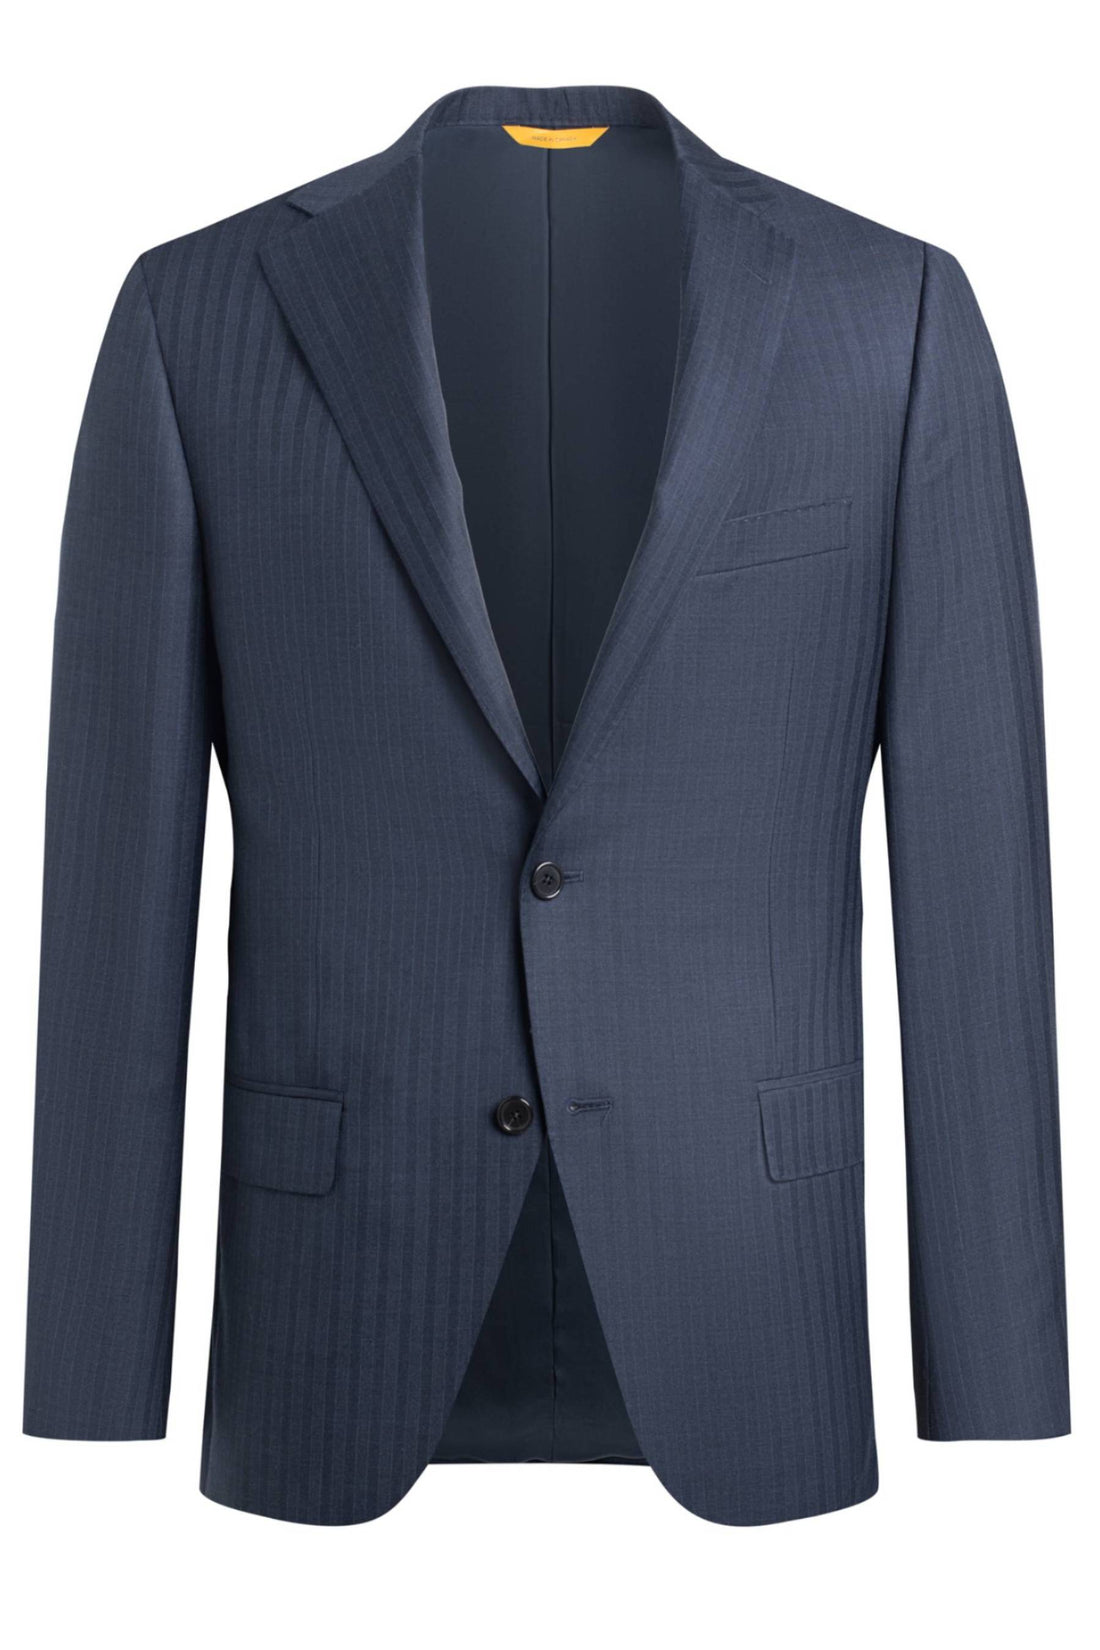 Heritage Gold Navy 110'S H Bone with Blue Stripe front Jacket Suit